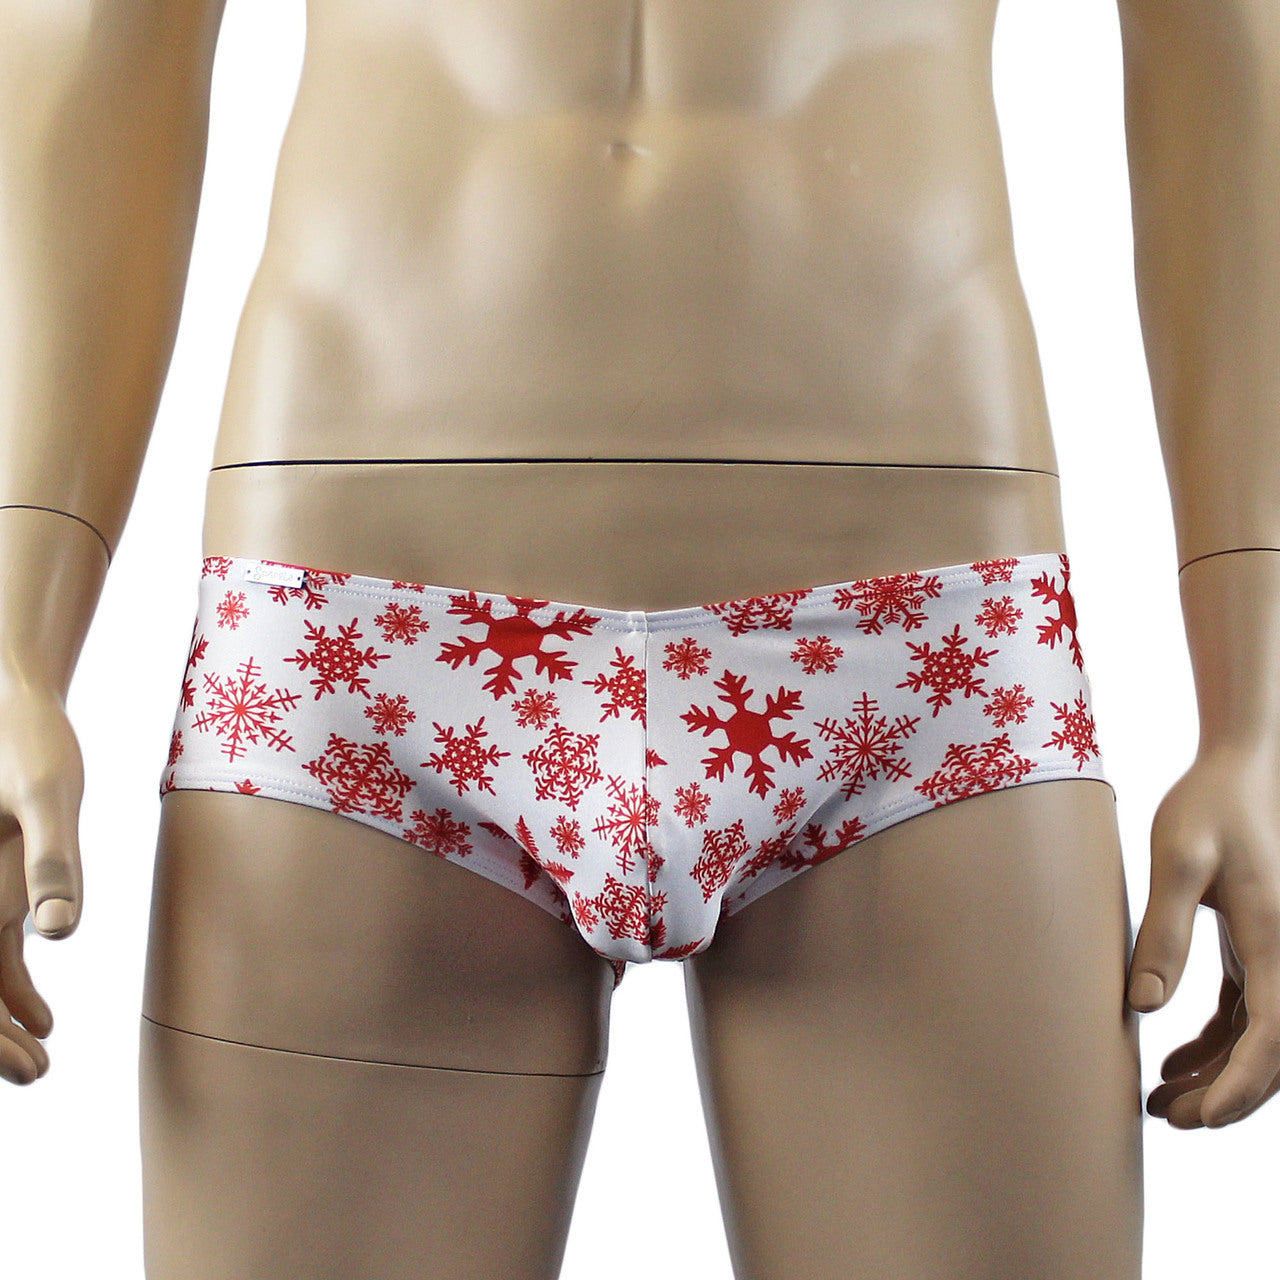 SALE - XMAS GIFT - Mens Christmas or Fun Party Time Boxer Briefs in a